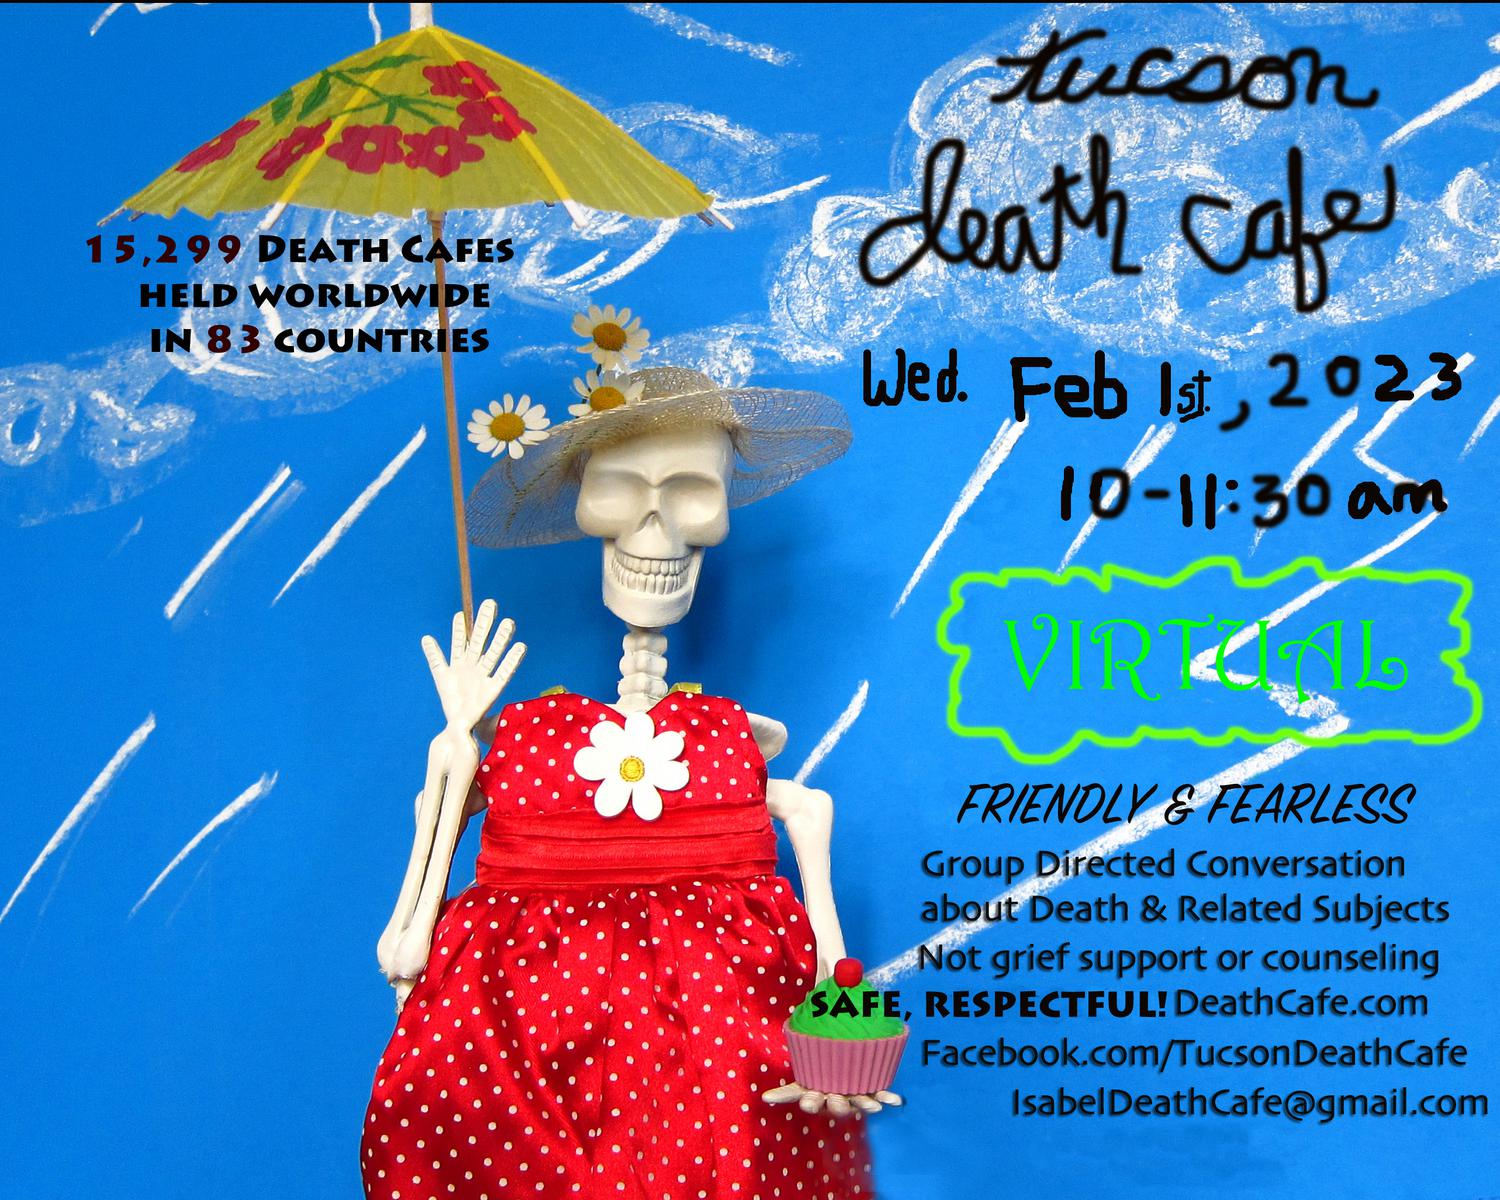 Tucson Online MST Friendly & Fearless Death Cafe